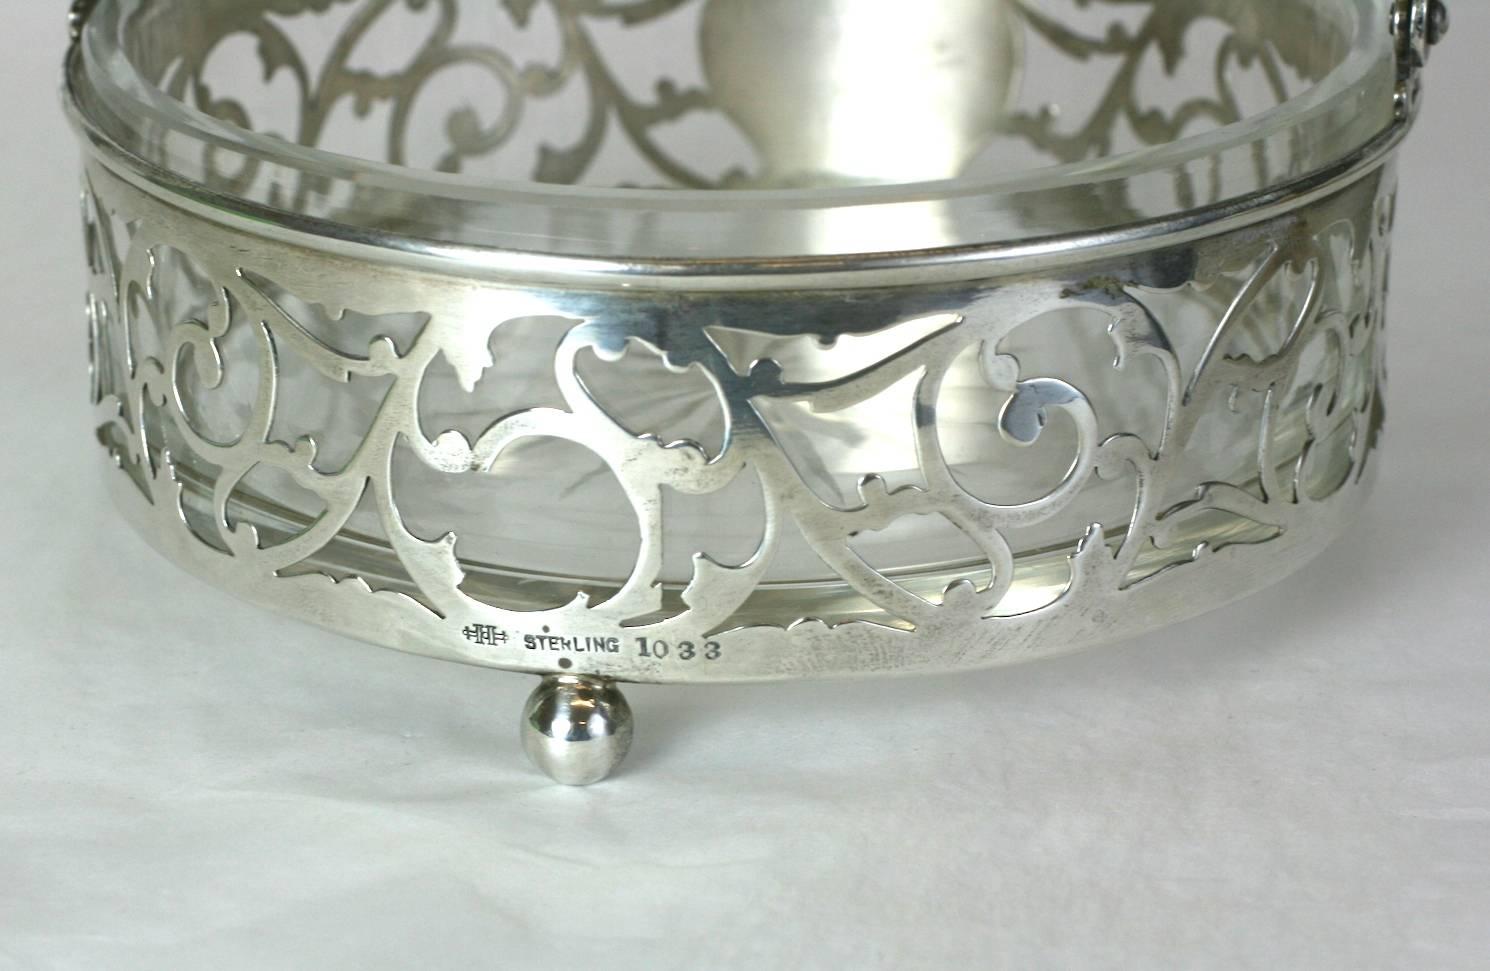 North American Sterling Handled Candy Dish For Sale